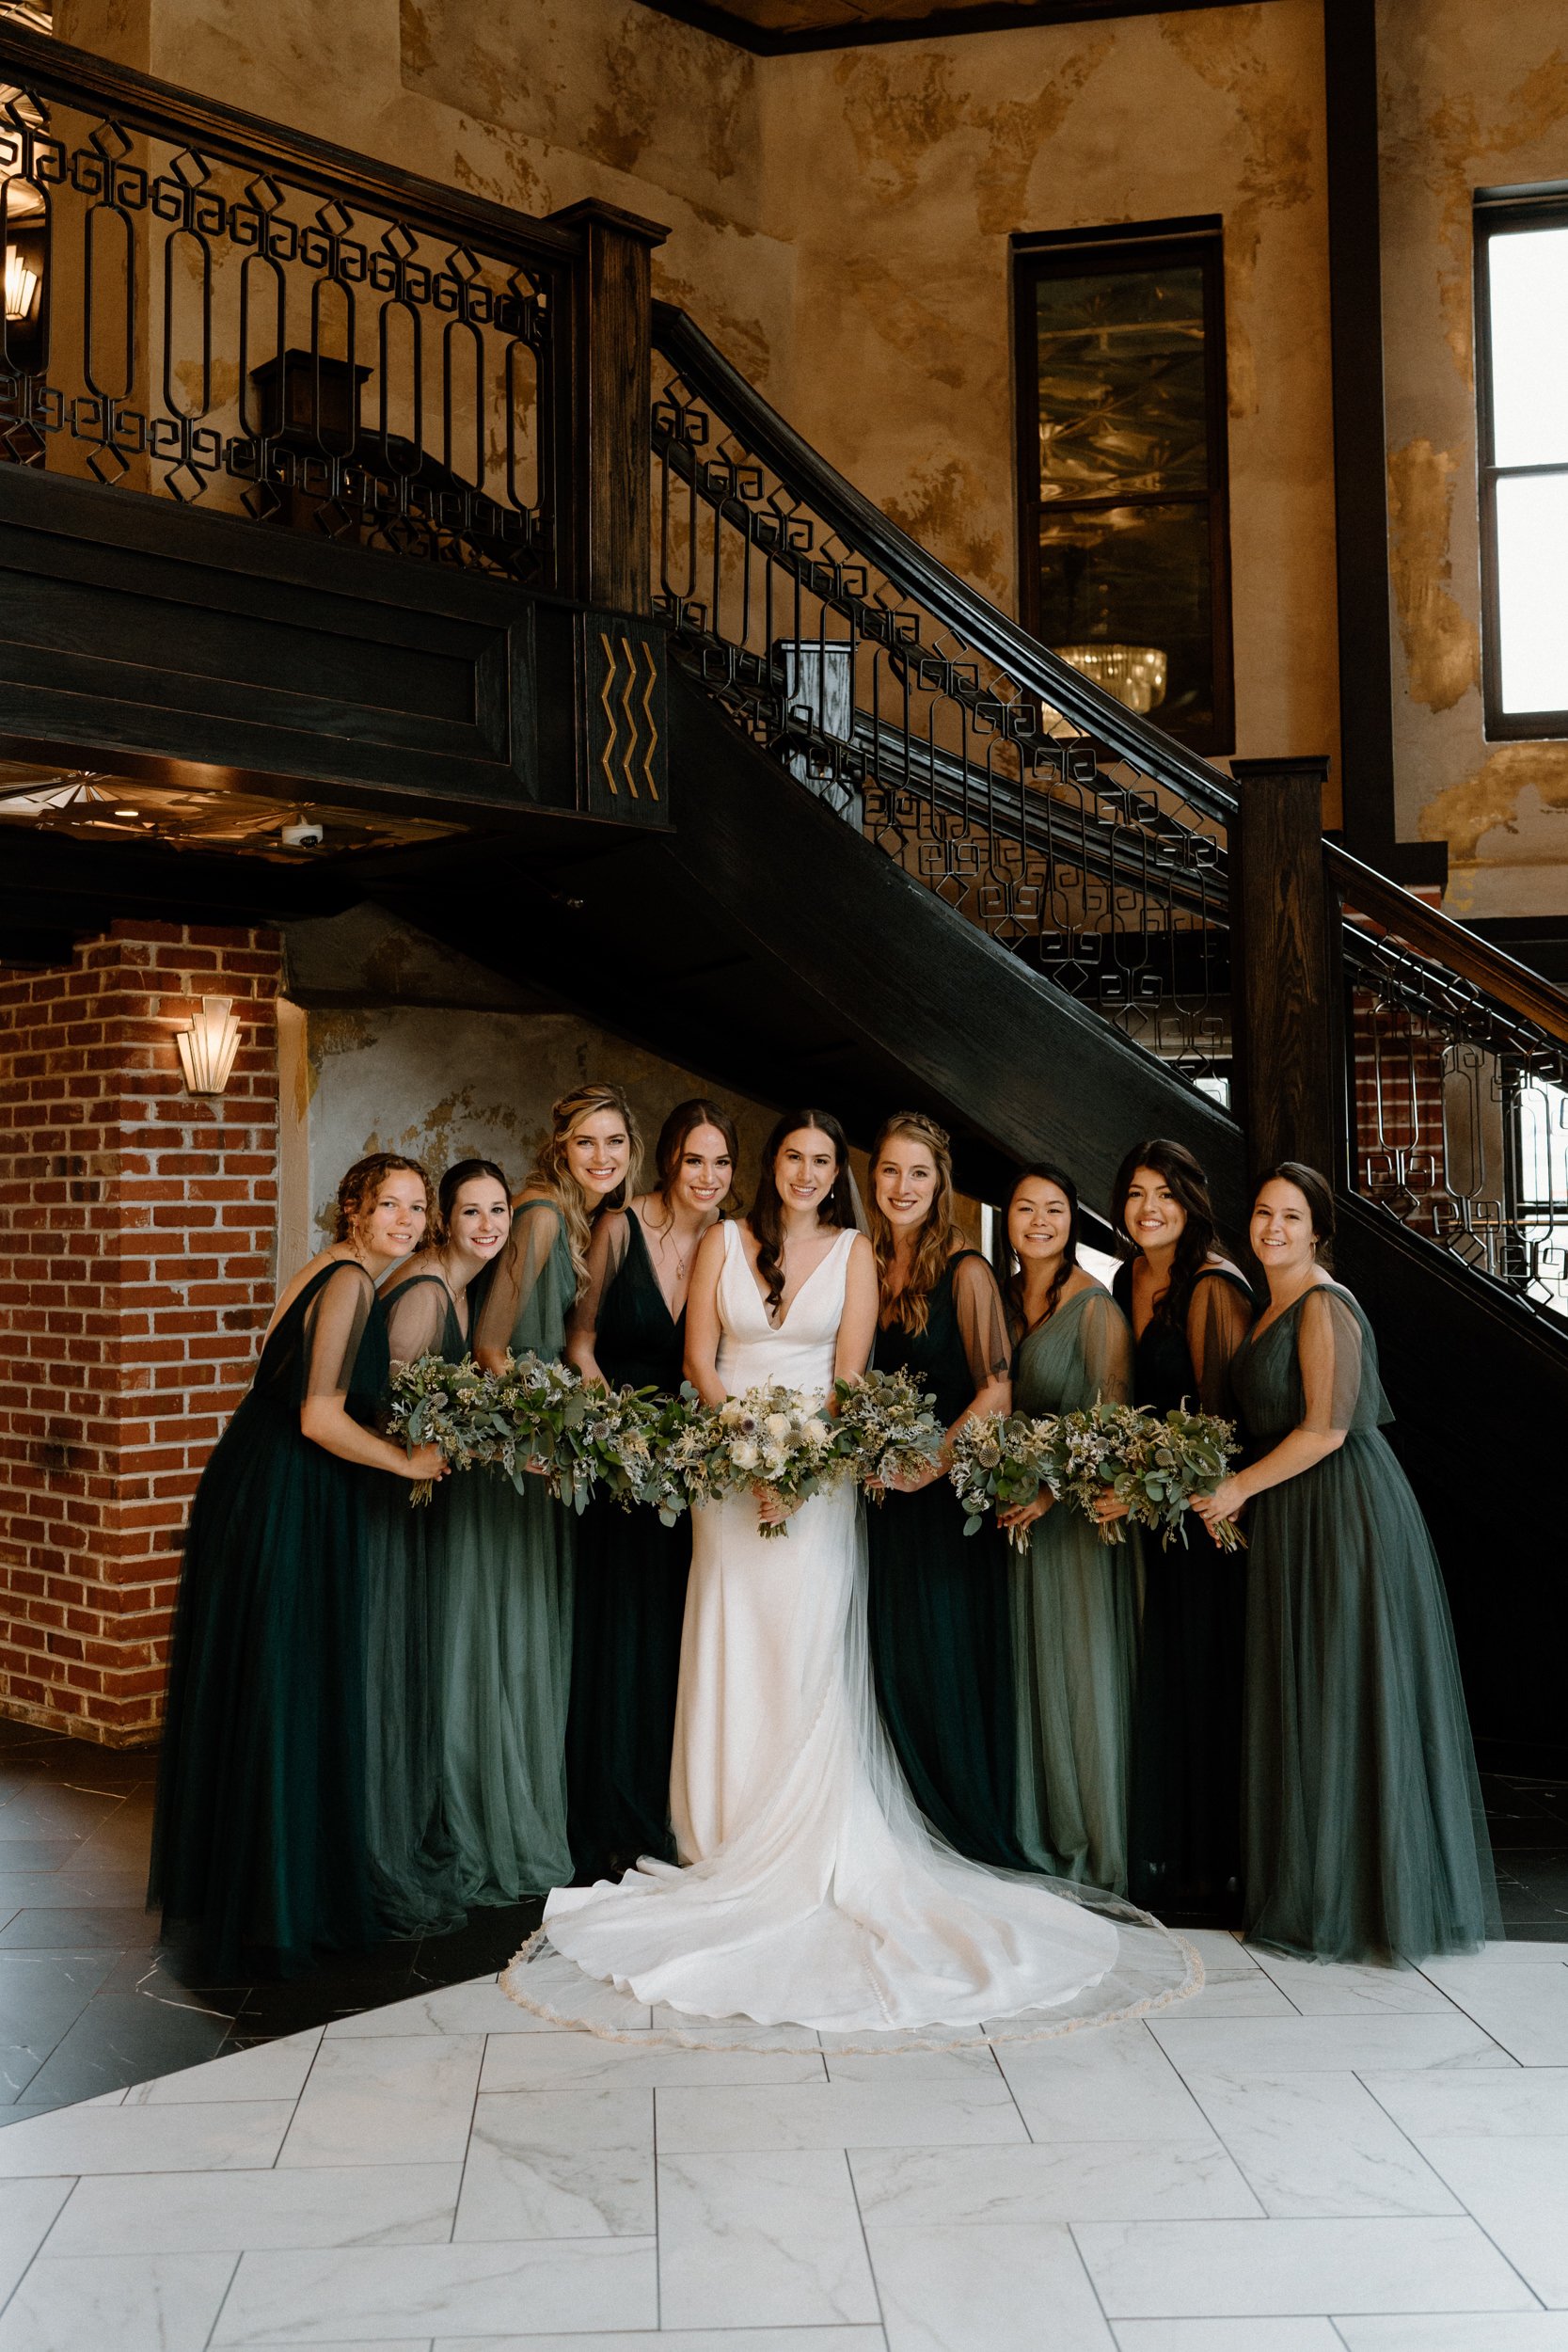 The bride and her bridesmaids pose beneath the staircase at Ironworks in Denver, CO